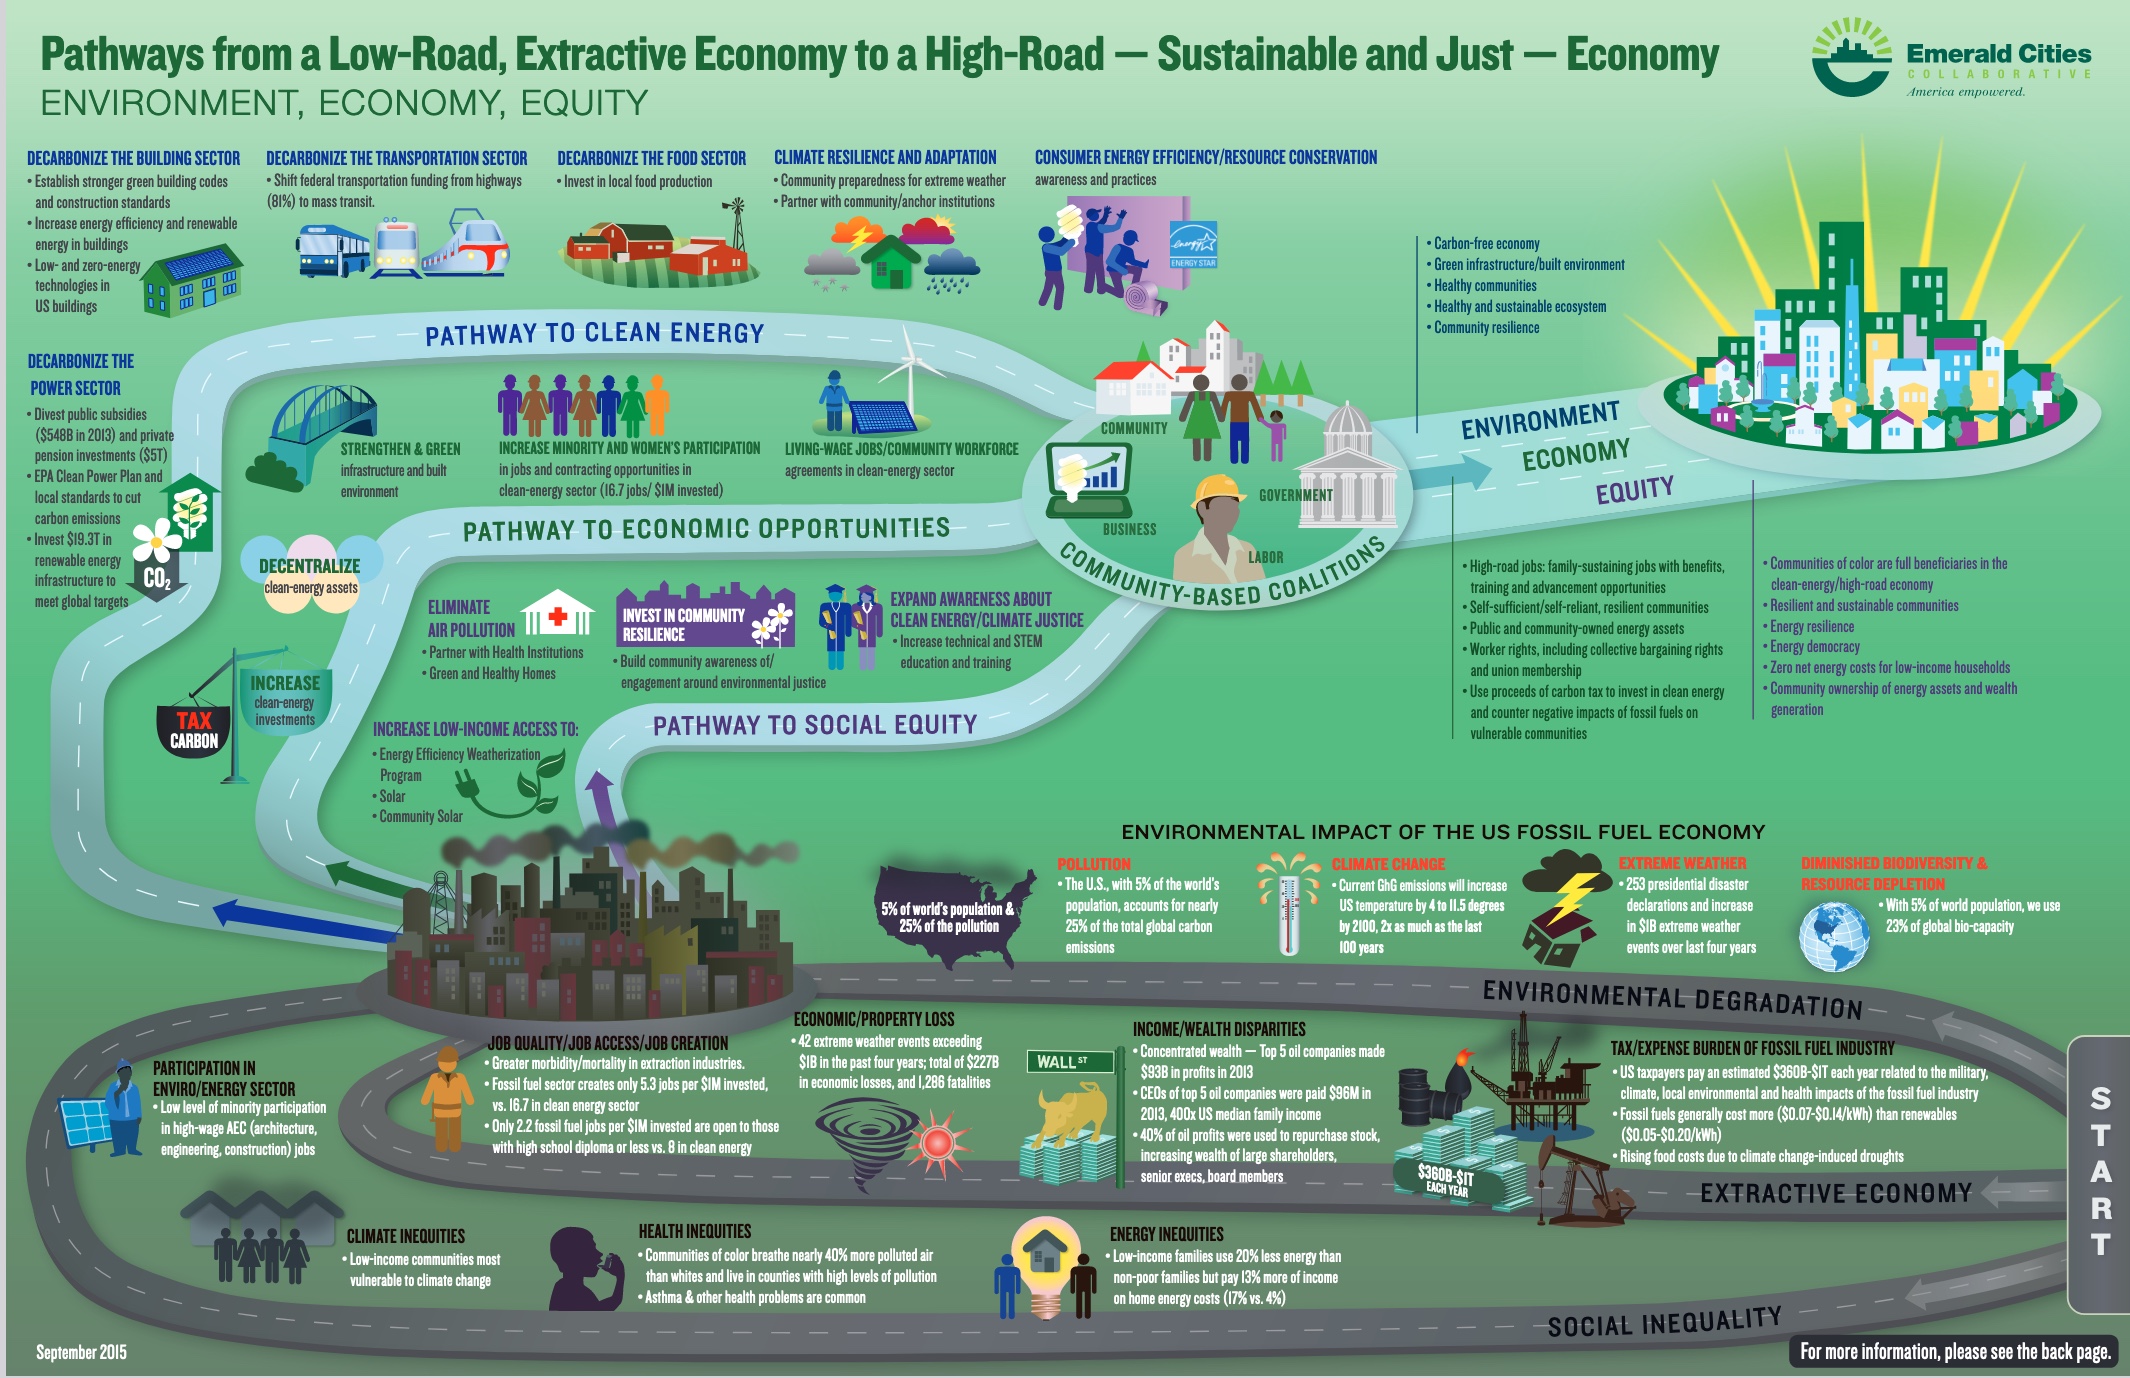 <i>Pathways from a extractive economy to a – sustainable and just - economy</i>